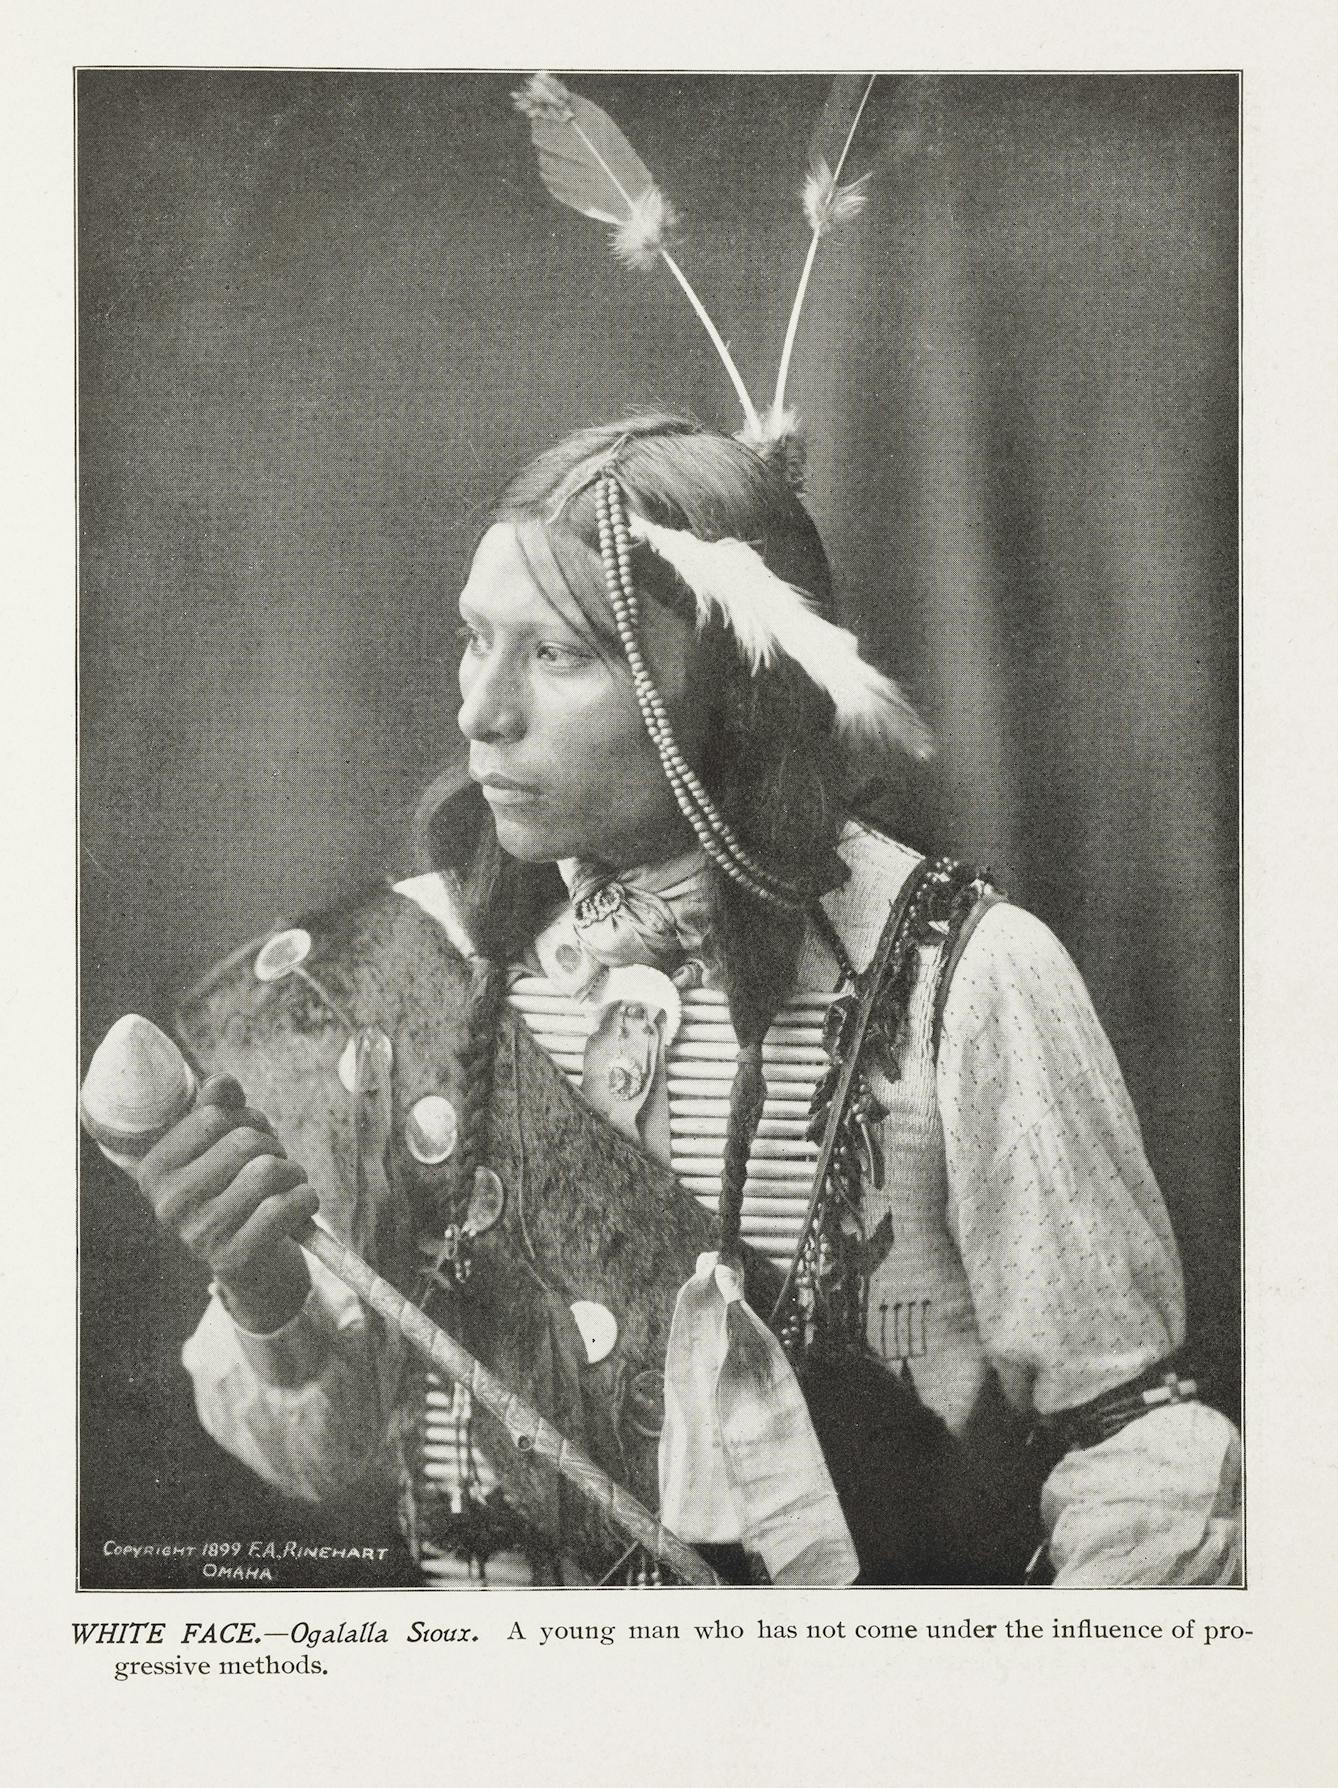 White Face of the Oglala Sioux